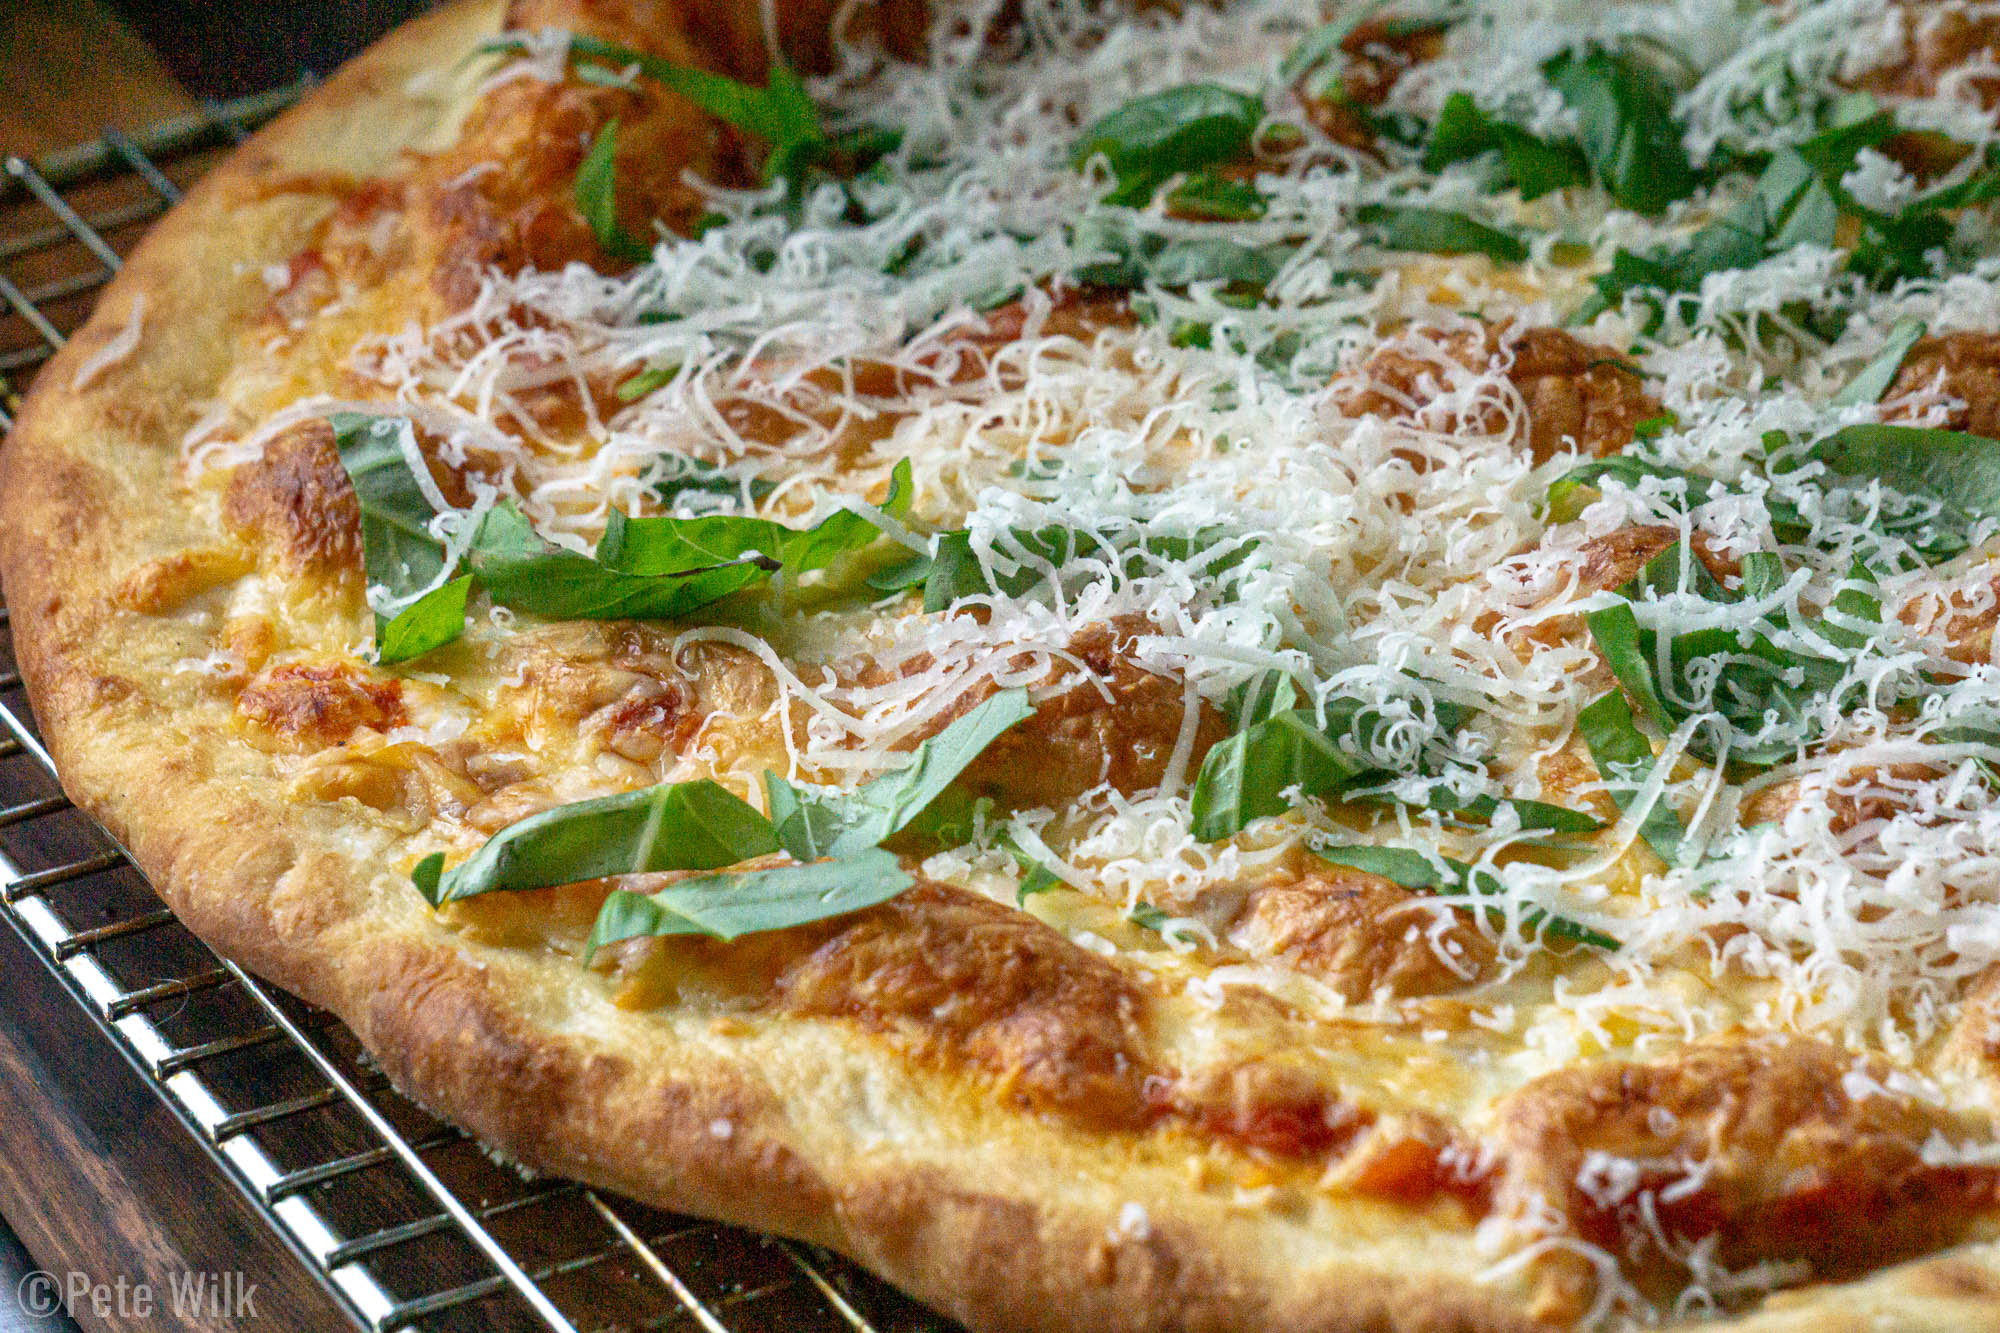 We've got a new pizza dough recipe and it is amazing.  Another trick we've learned is getting the stone almost all the way to the top of the oven.